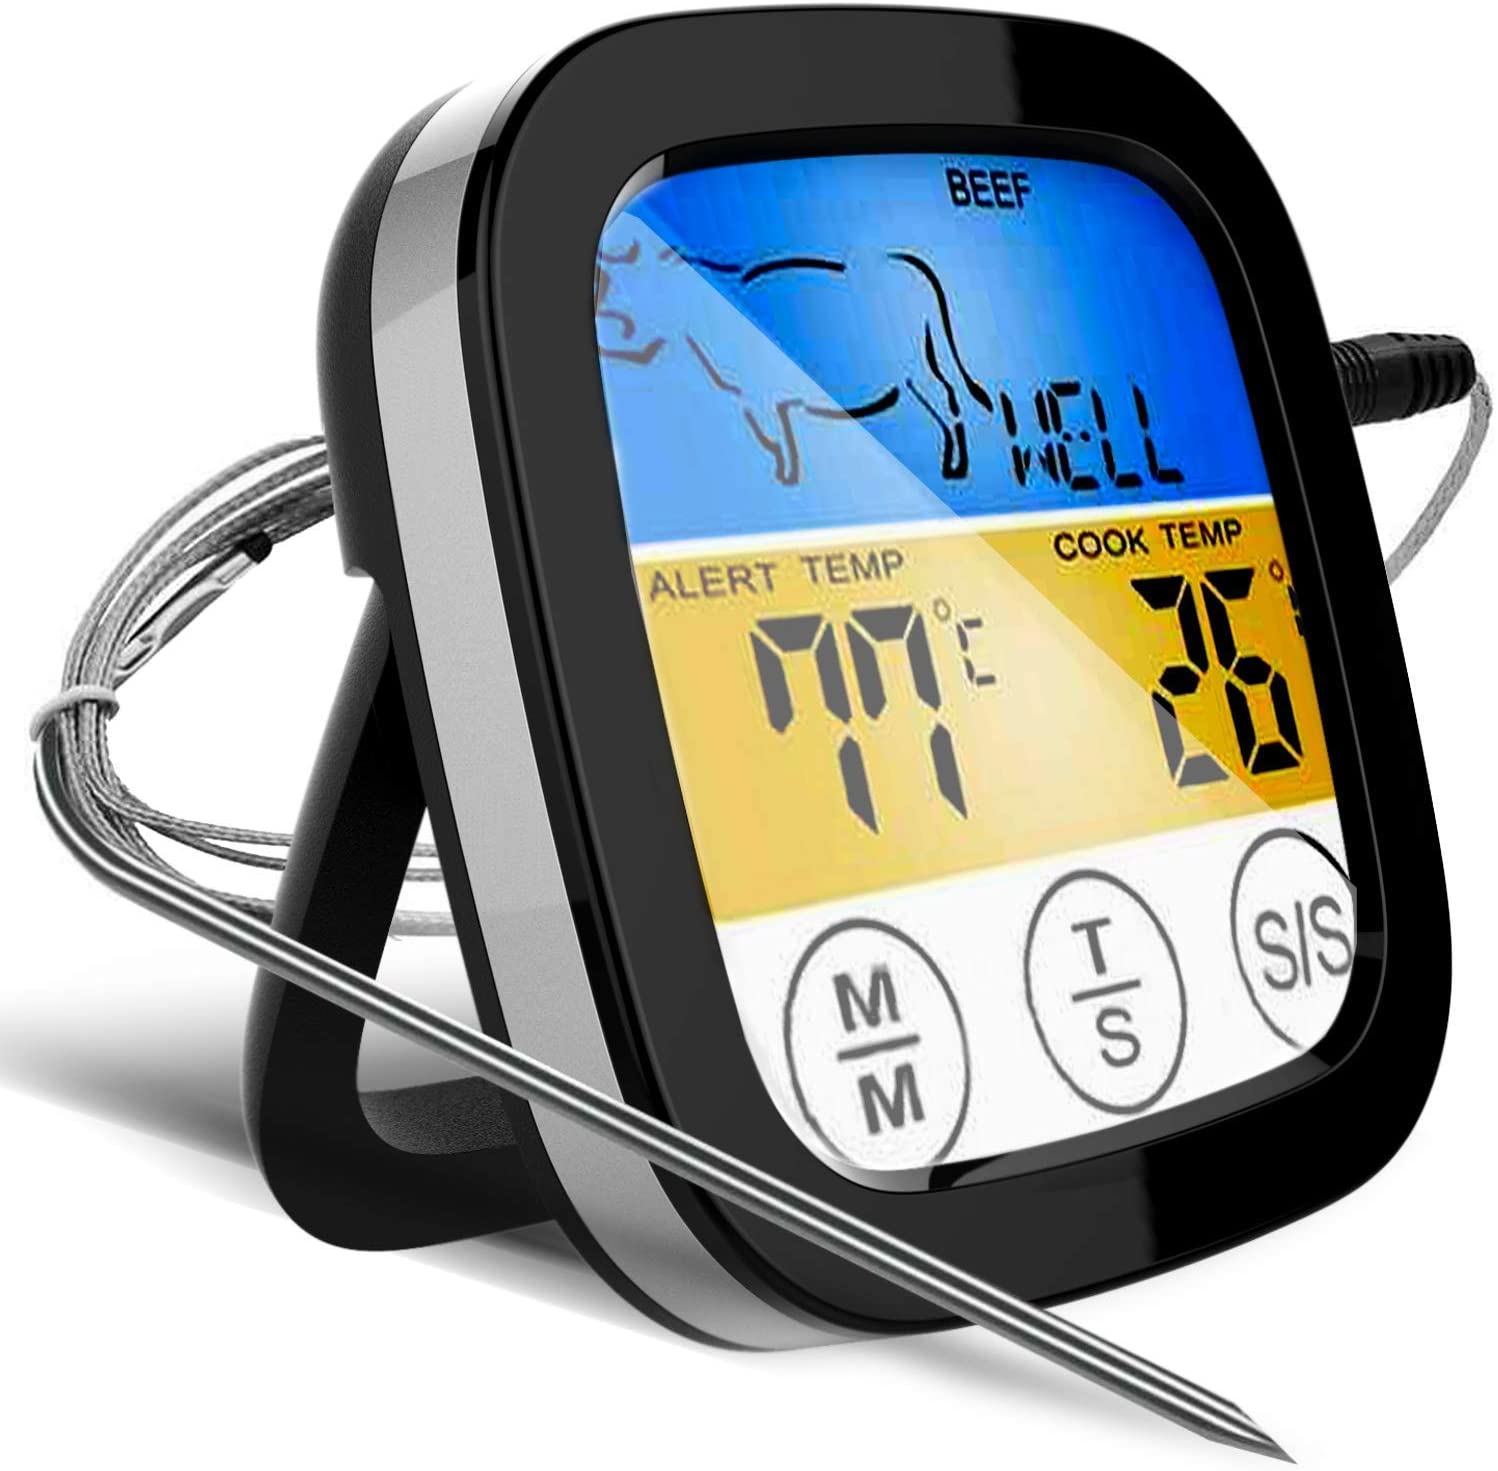 153 Smart Touchscreen Digital Meat Thermometer